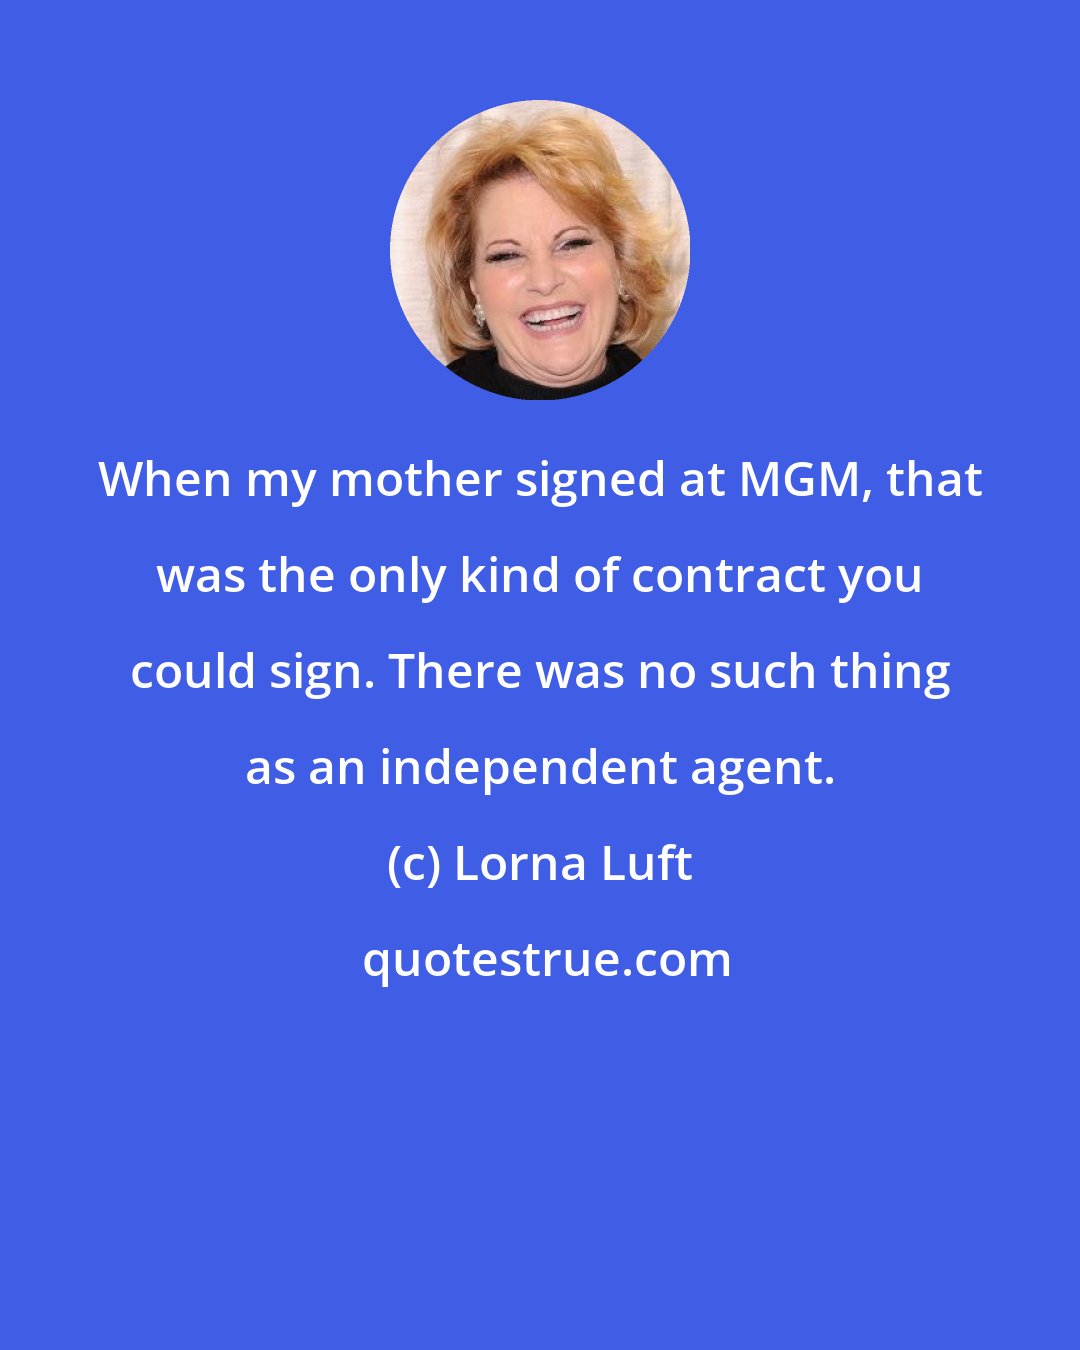 Lorna Luft: When my mother signed at MGM, that was the only kind of contract you could sign. There was no such thing as an independent agent.